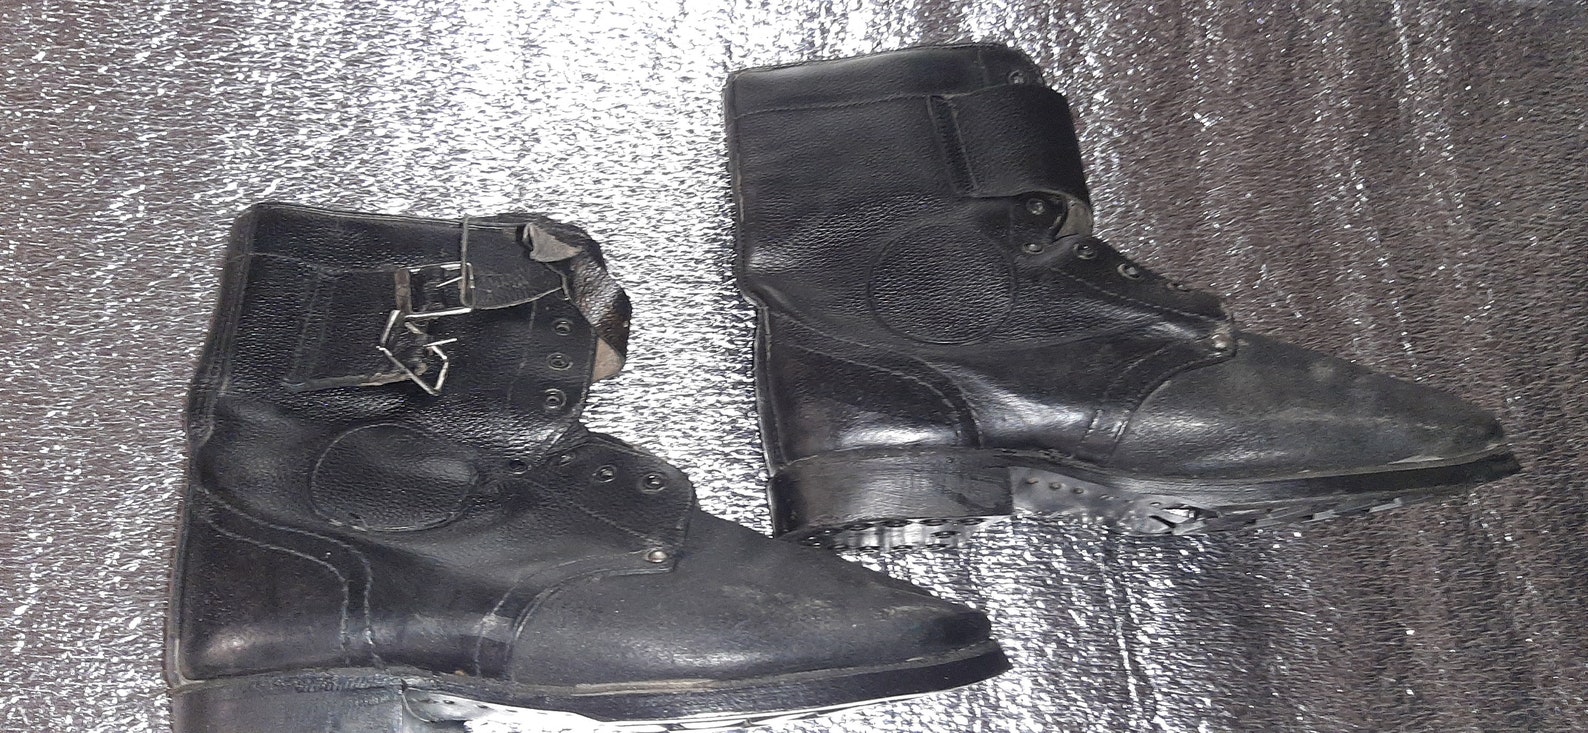 Afghan Ankle Boots Military Soviet Army USSR | Etsy